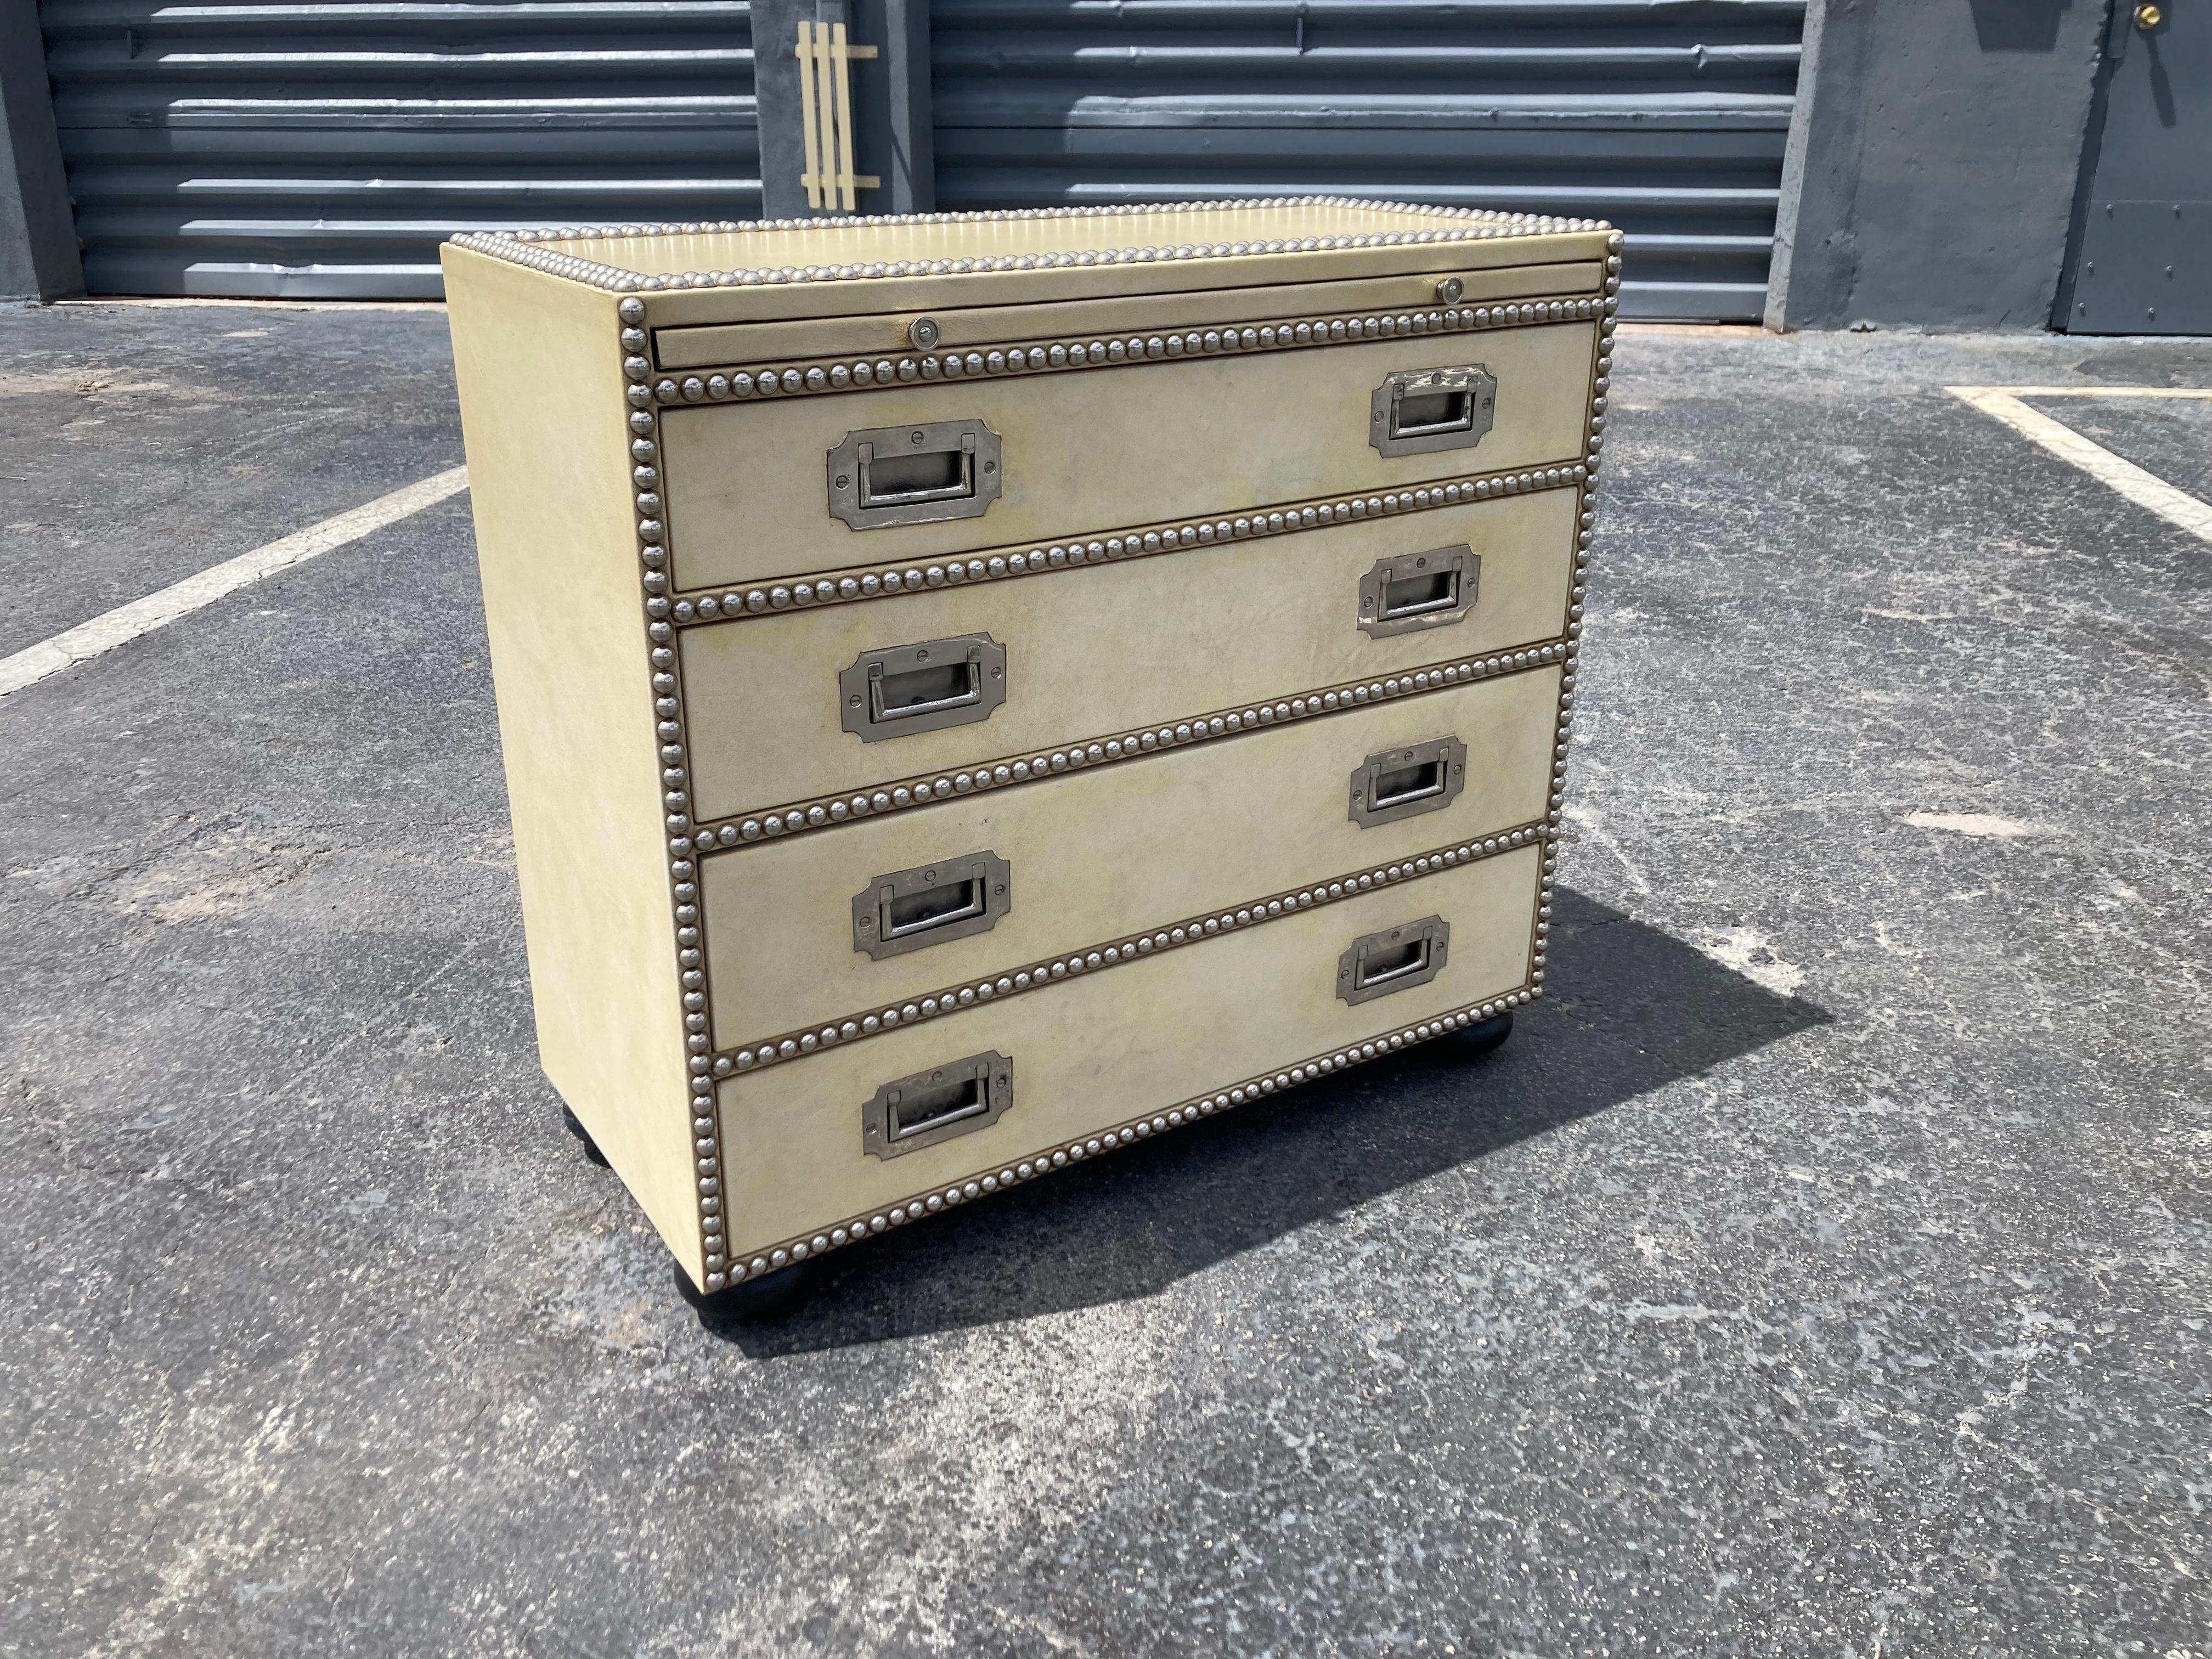 Leather Campaign Chest of drawers. Nickel hardware and tacks, leather with patina. The chest has four drawers and one pull out writing board.